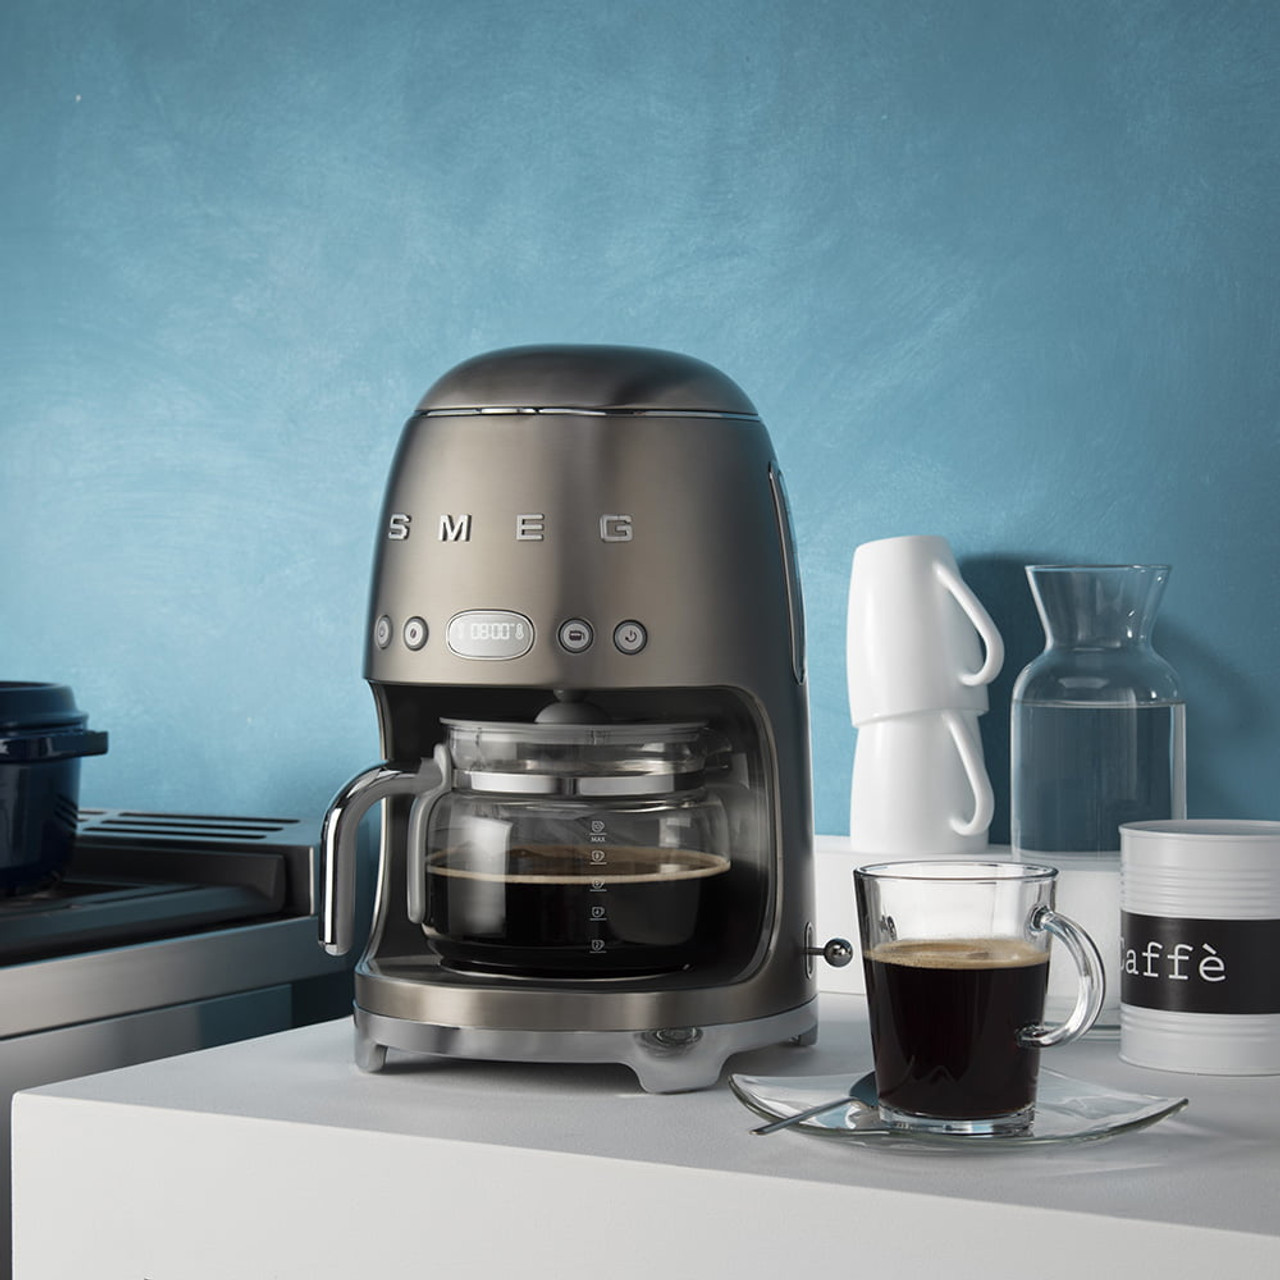 How to set up the Smeg Drip Filter Coffee Machine